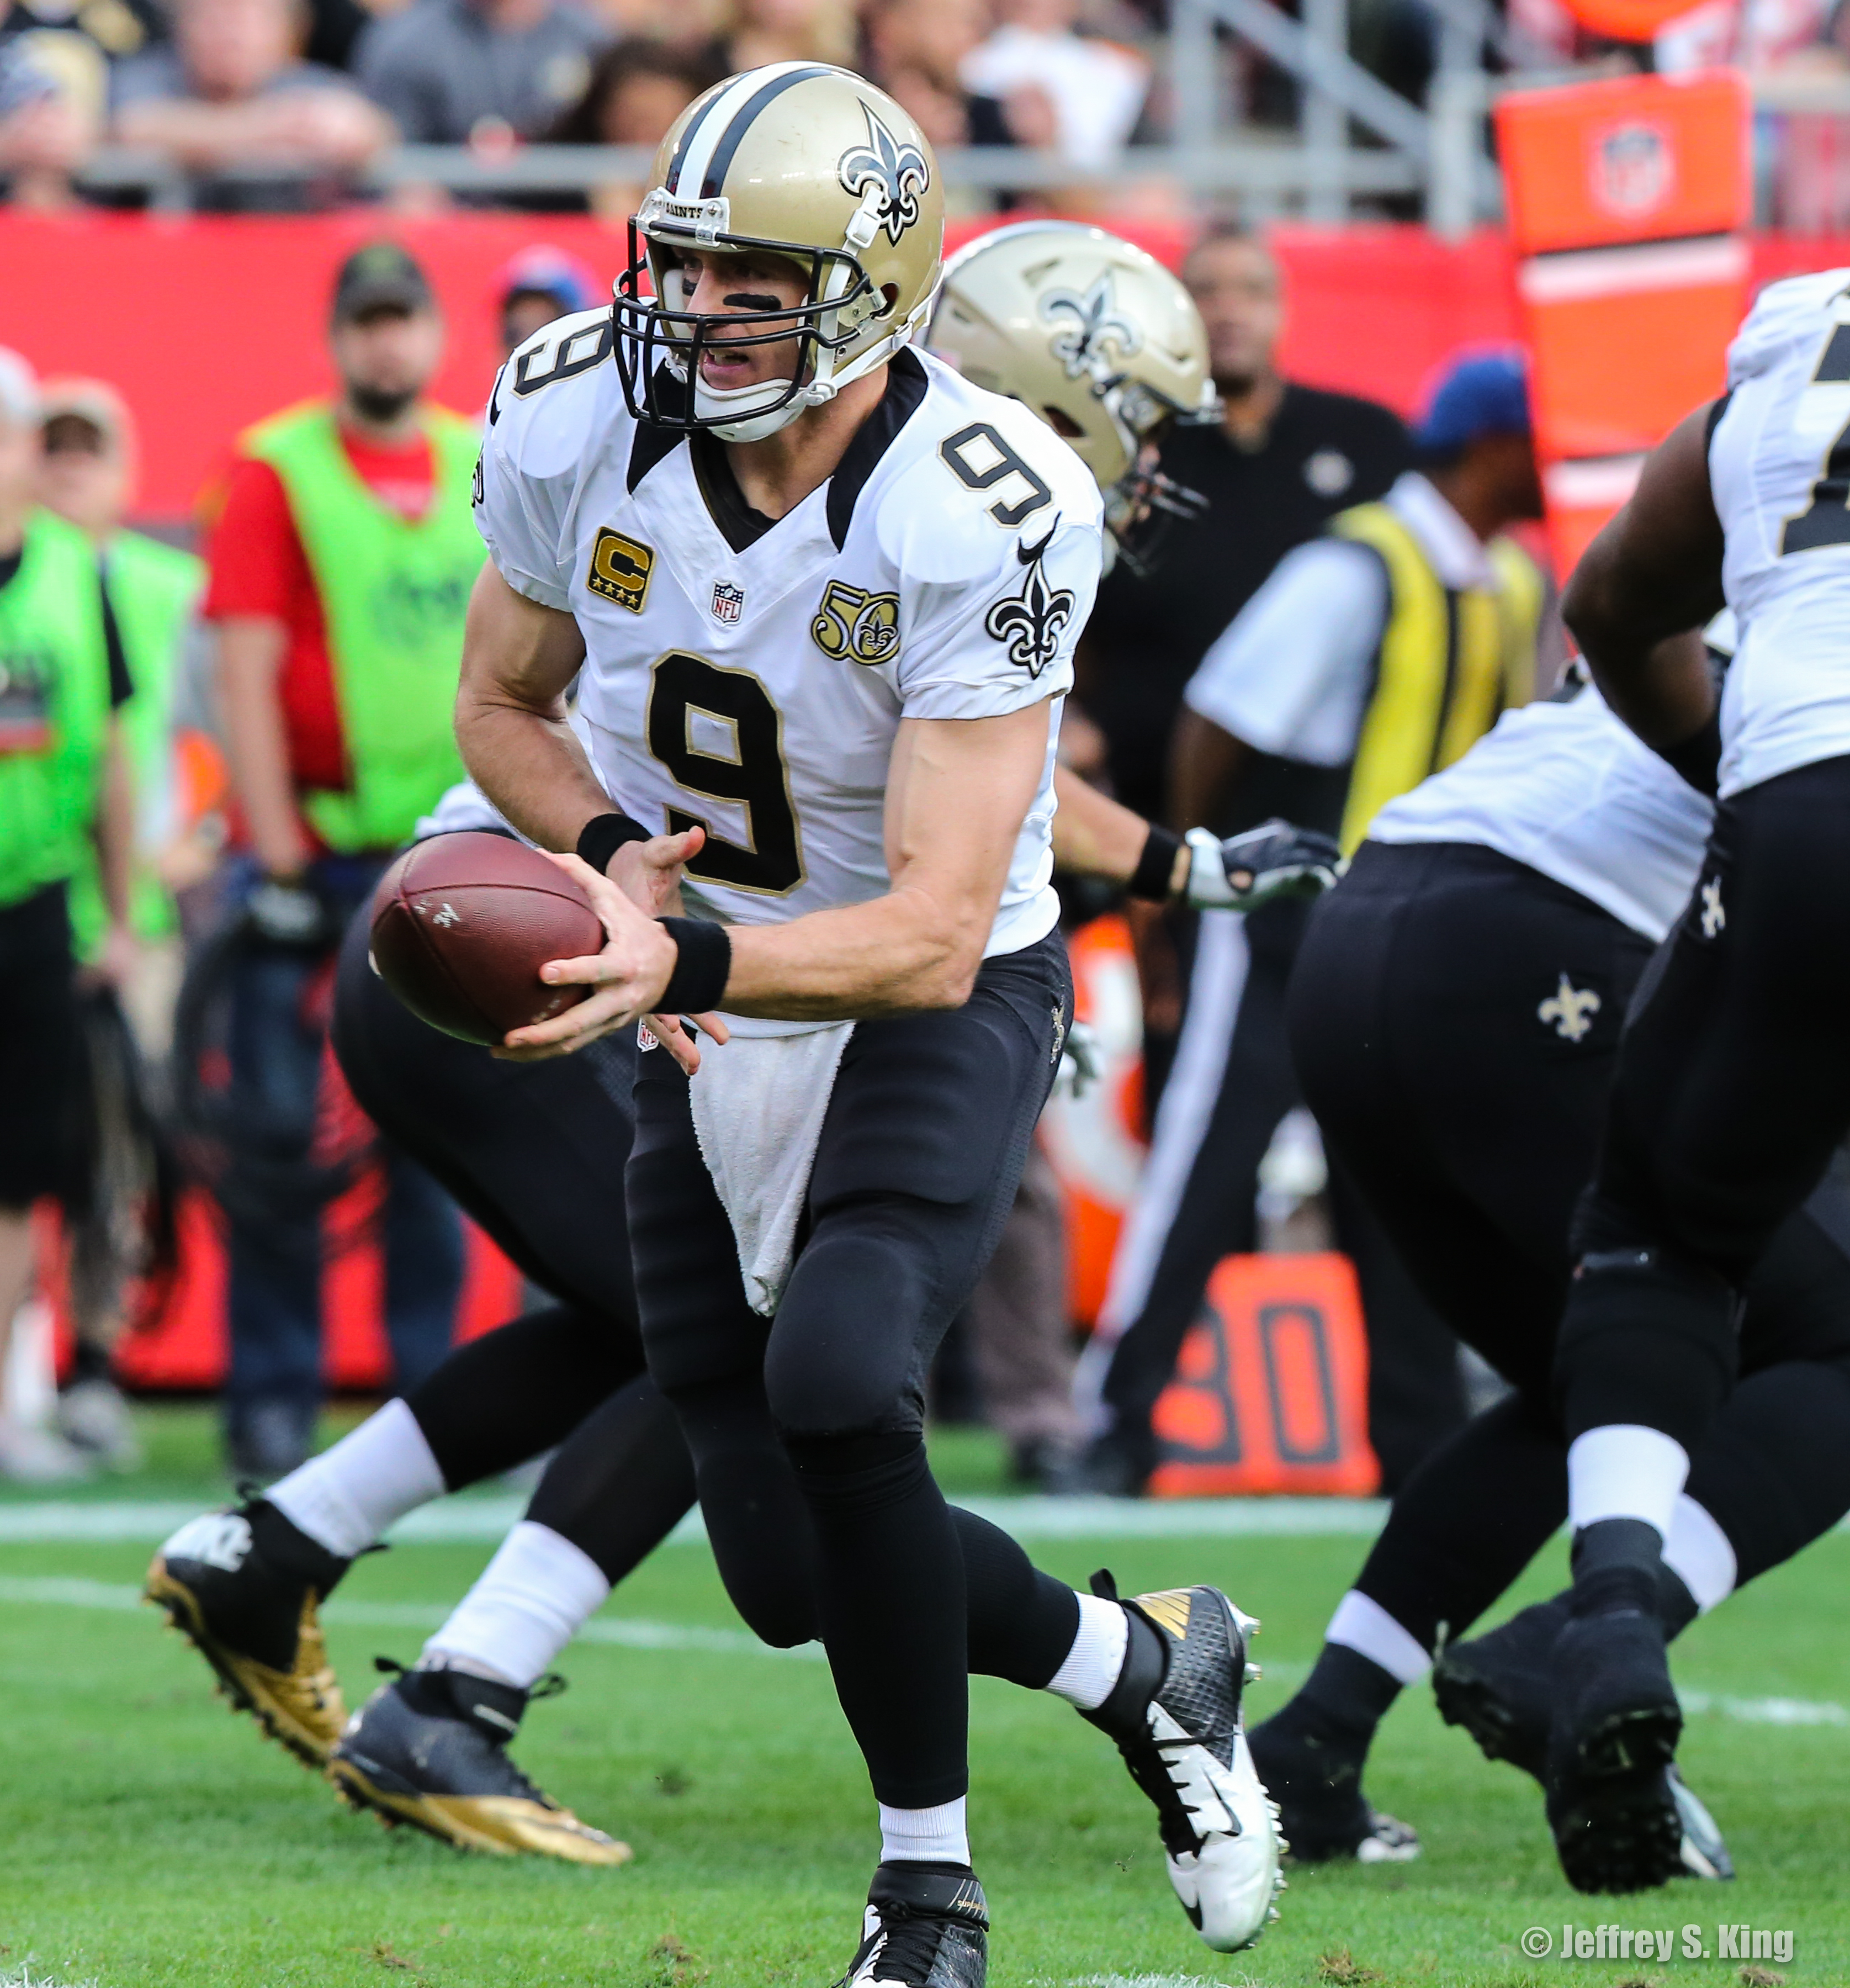 Brees has beaten the Bucs 15 times in his career./JEFFREY S. KING